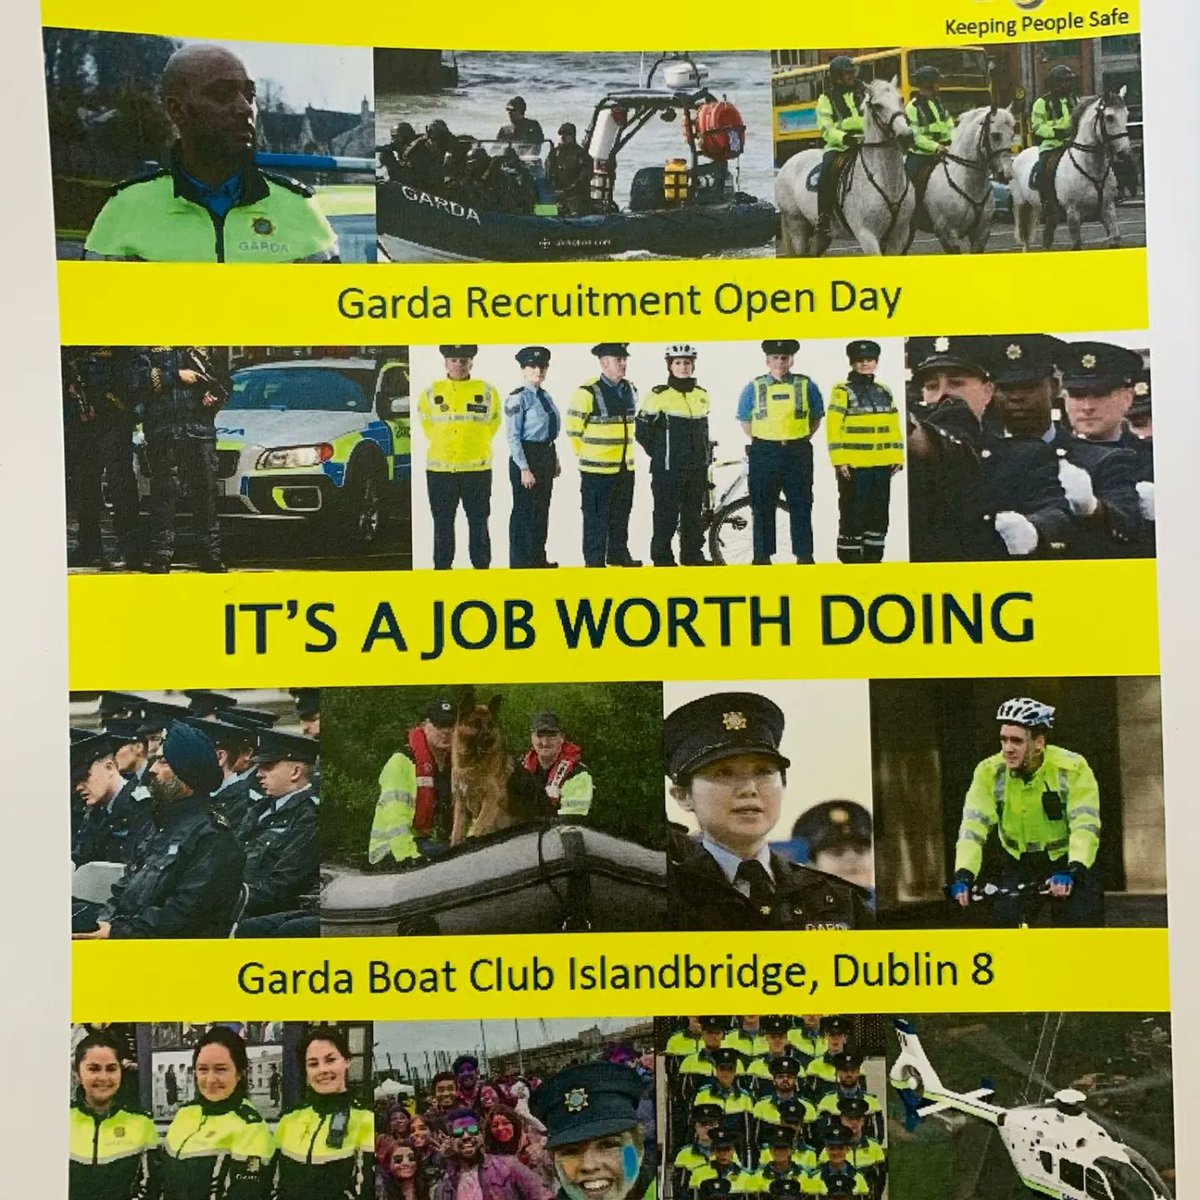 Delighted to see An Garda Síocháná's new diversity vehicle at the Garda Boat Club this morning. Recruitment open day until 2pm! Pop in and say hello #ajobworthdoing #policingwithpride